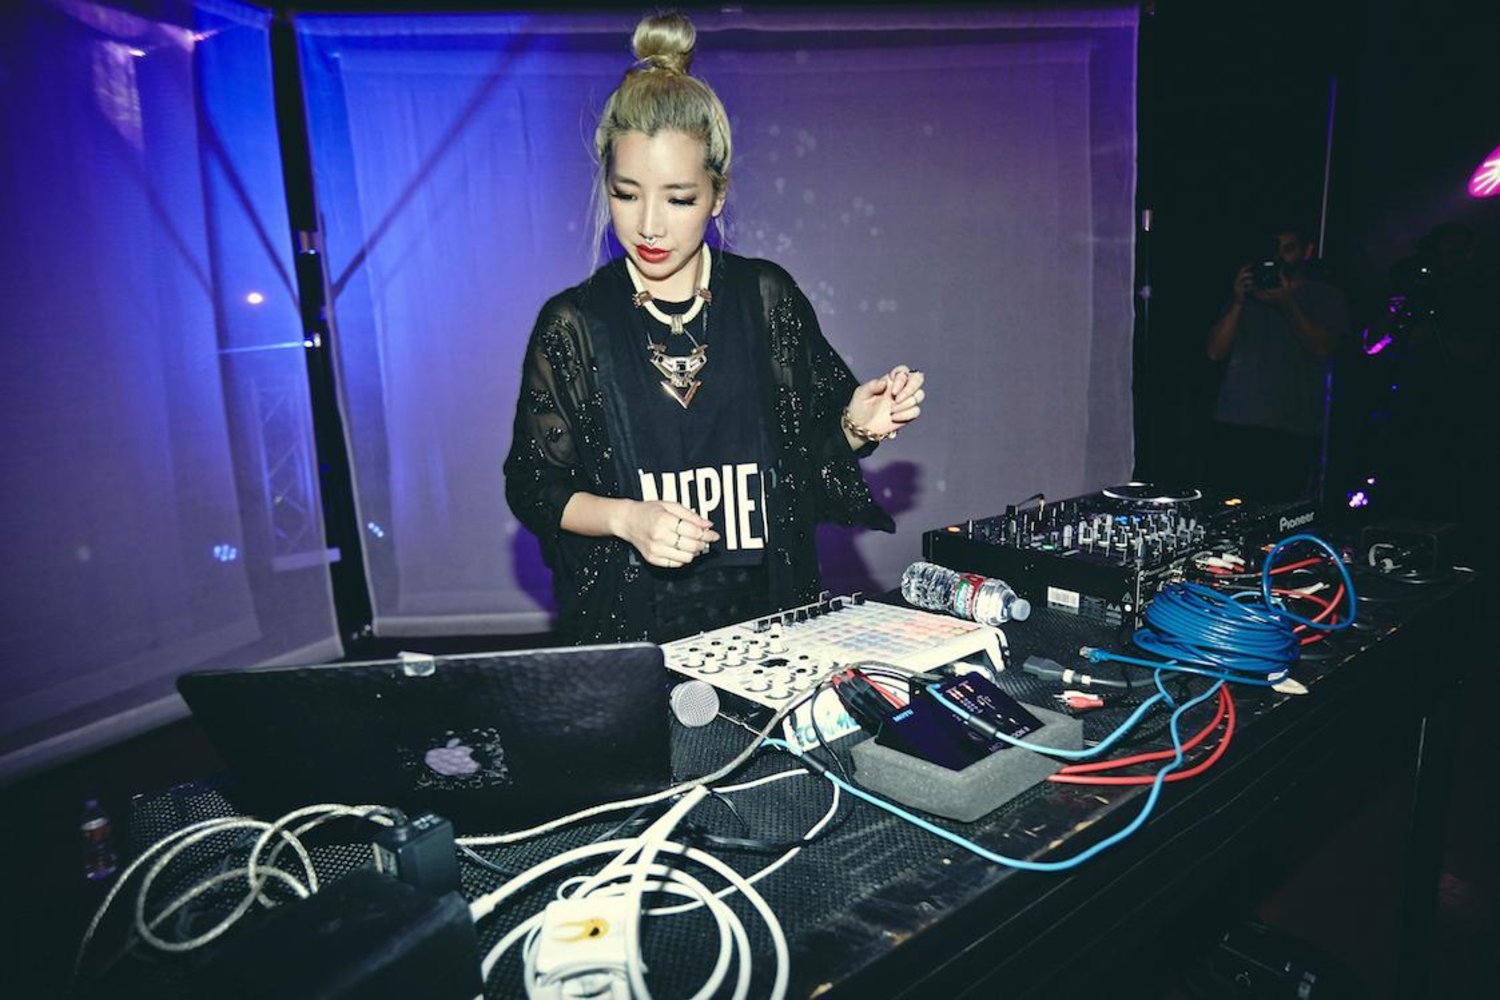 Tokimonsta performs at Red Bull Studios in Los Angeles, CA, USA on 17 September 2014.